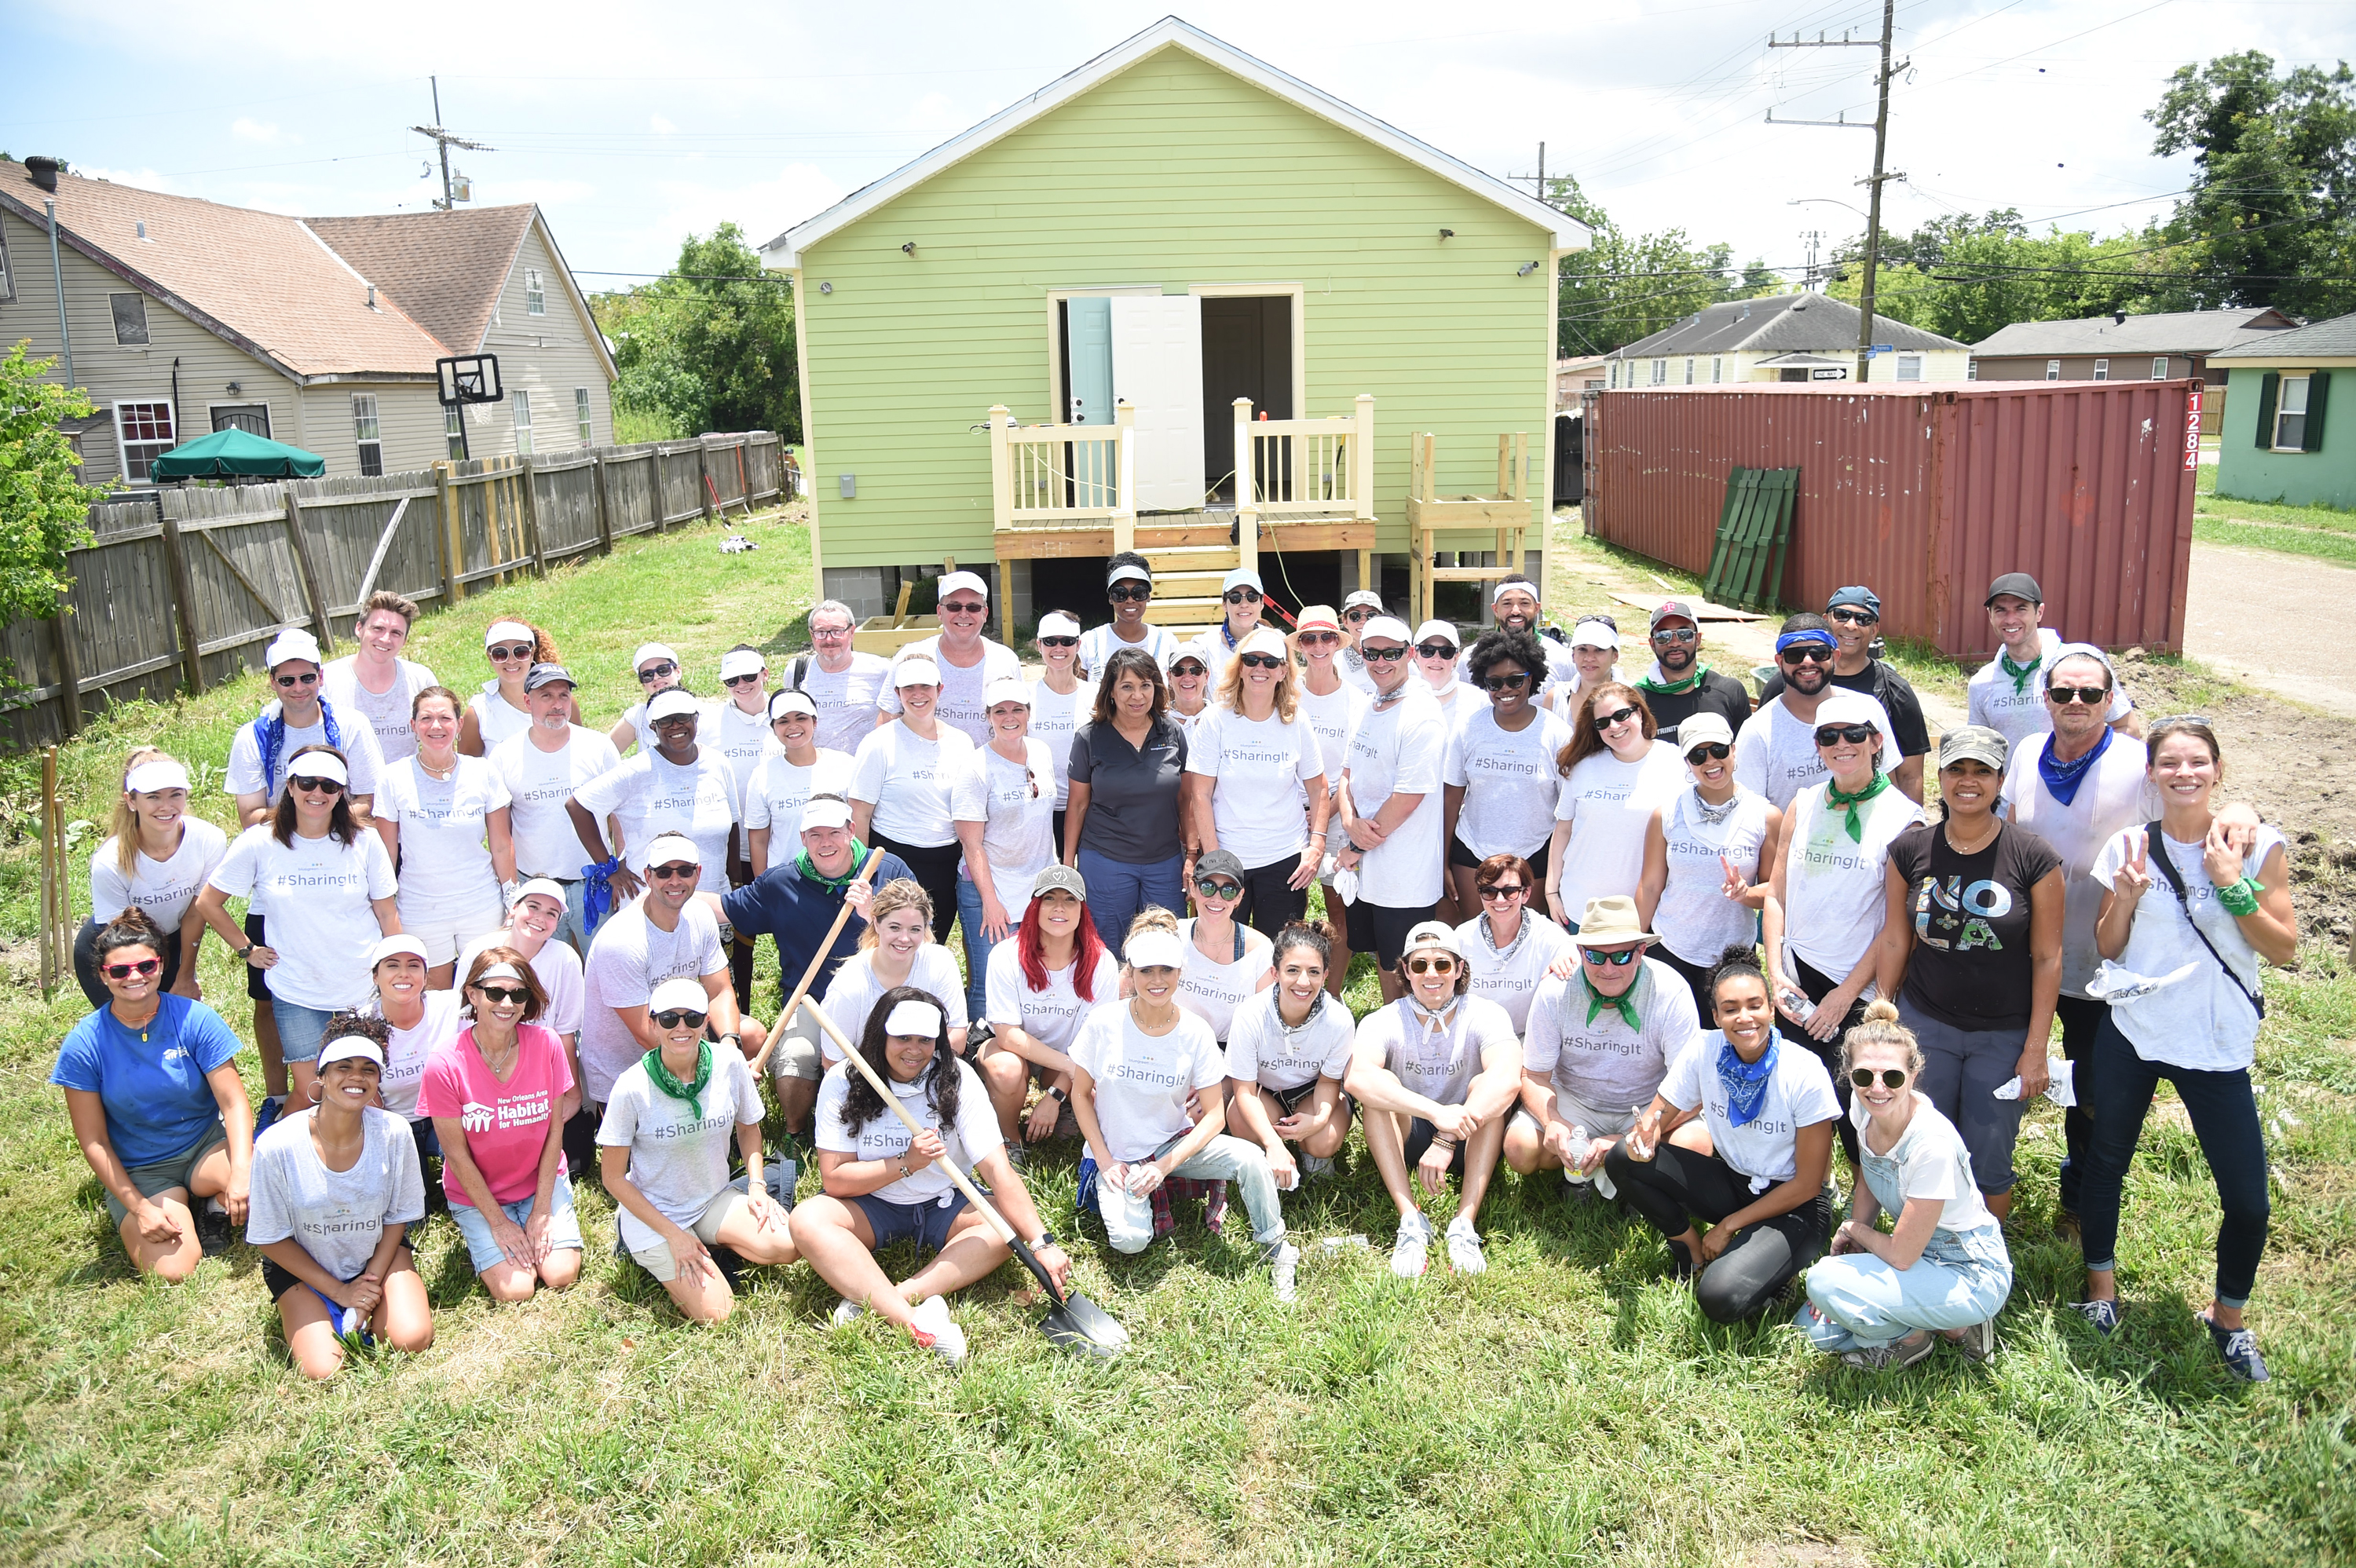 Stephanie Giordano, Famous Rhodes, Jennifer Williams, Sharna Burgess, Sasha Pieterse, Olivia Jordan, Jason Lewis, Annie Ilonzeh, Anne Winters, Brandon Larracuente, Paulette Kam, and Taylor Beau Makohoniuk join Bluegreen Vacations and New Orleans area Habitat for Humanity to construct a home in the Lower 9th Ward in New Orleans, LA @bgvmarquee #onyourmarquee #bluegreenvacations @habitatnola